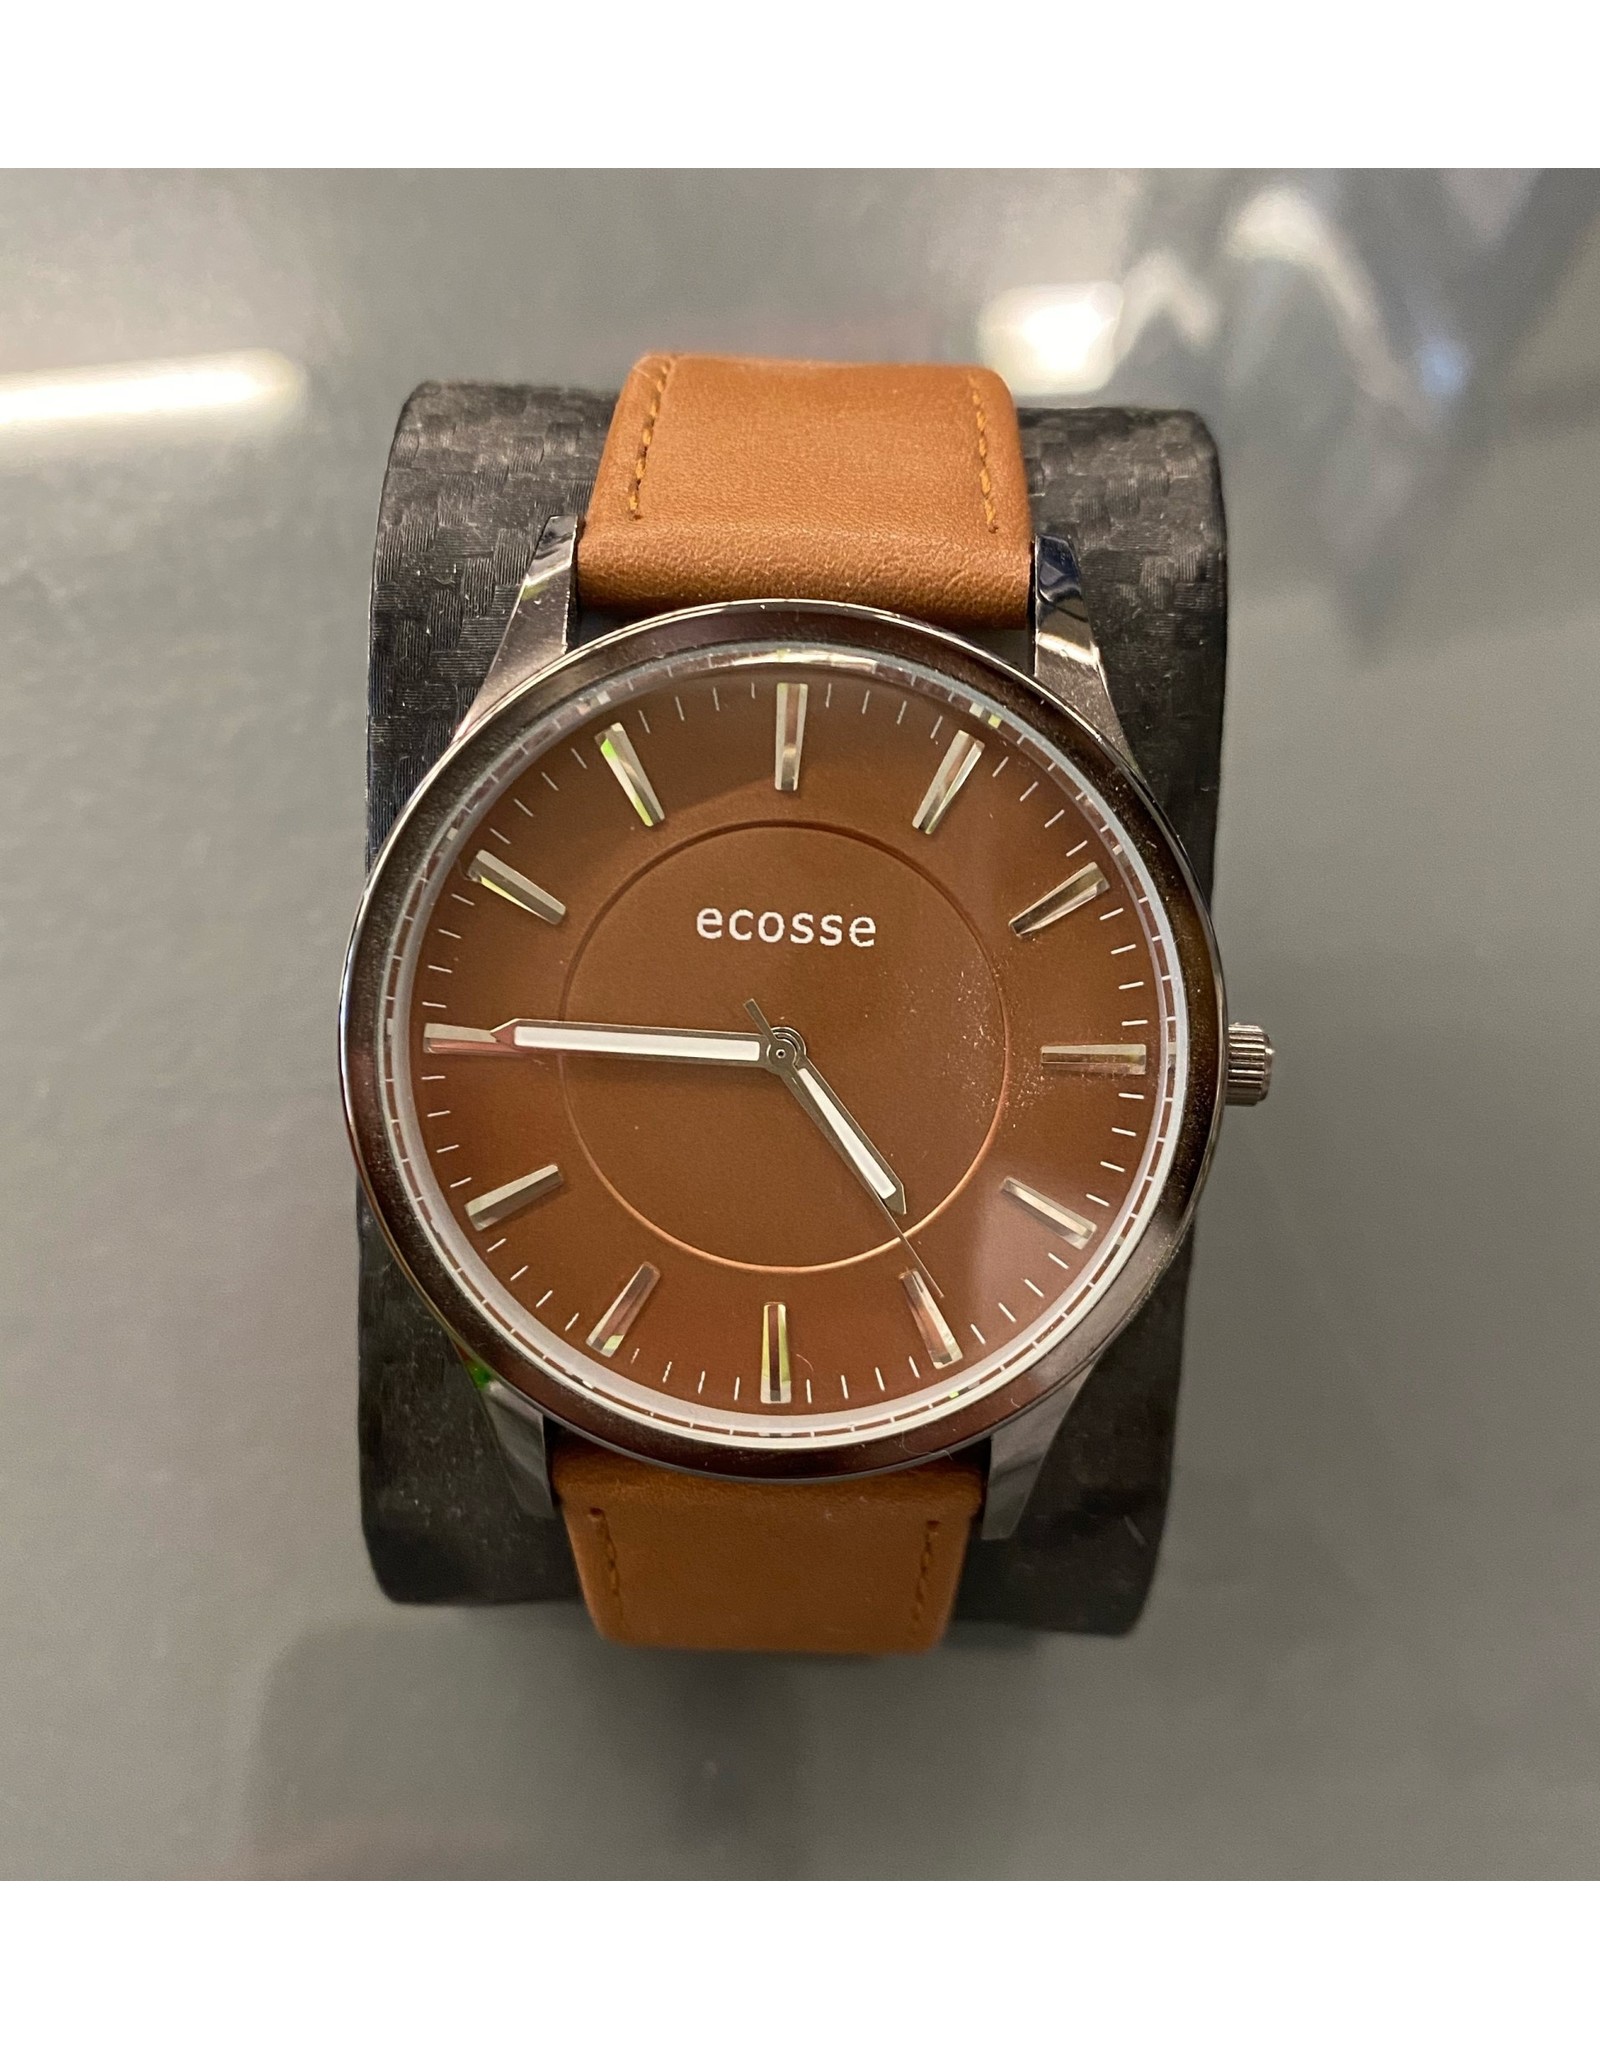 Mens Watch Brown Face with Brown Strap